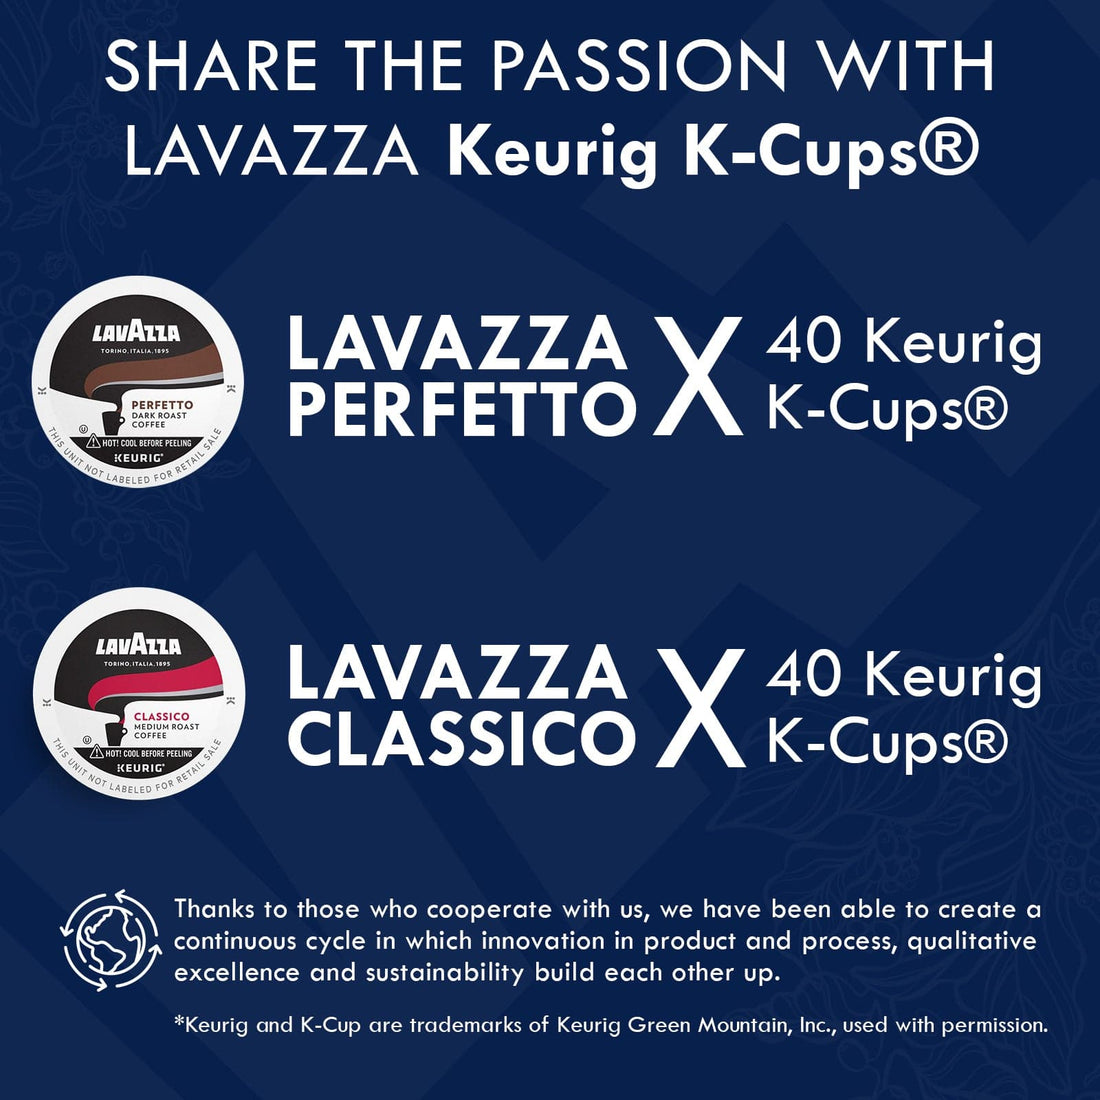 Lavazza K - Cups Variety Mix of 80 Coffee Pods - Classico Coffee & Perfetto, 40 capsules each